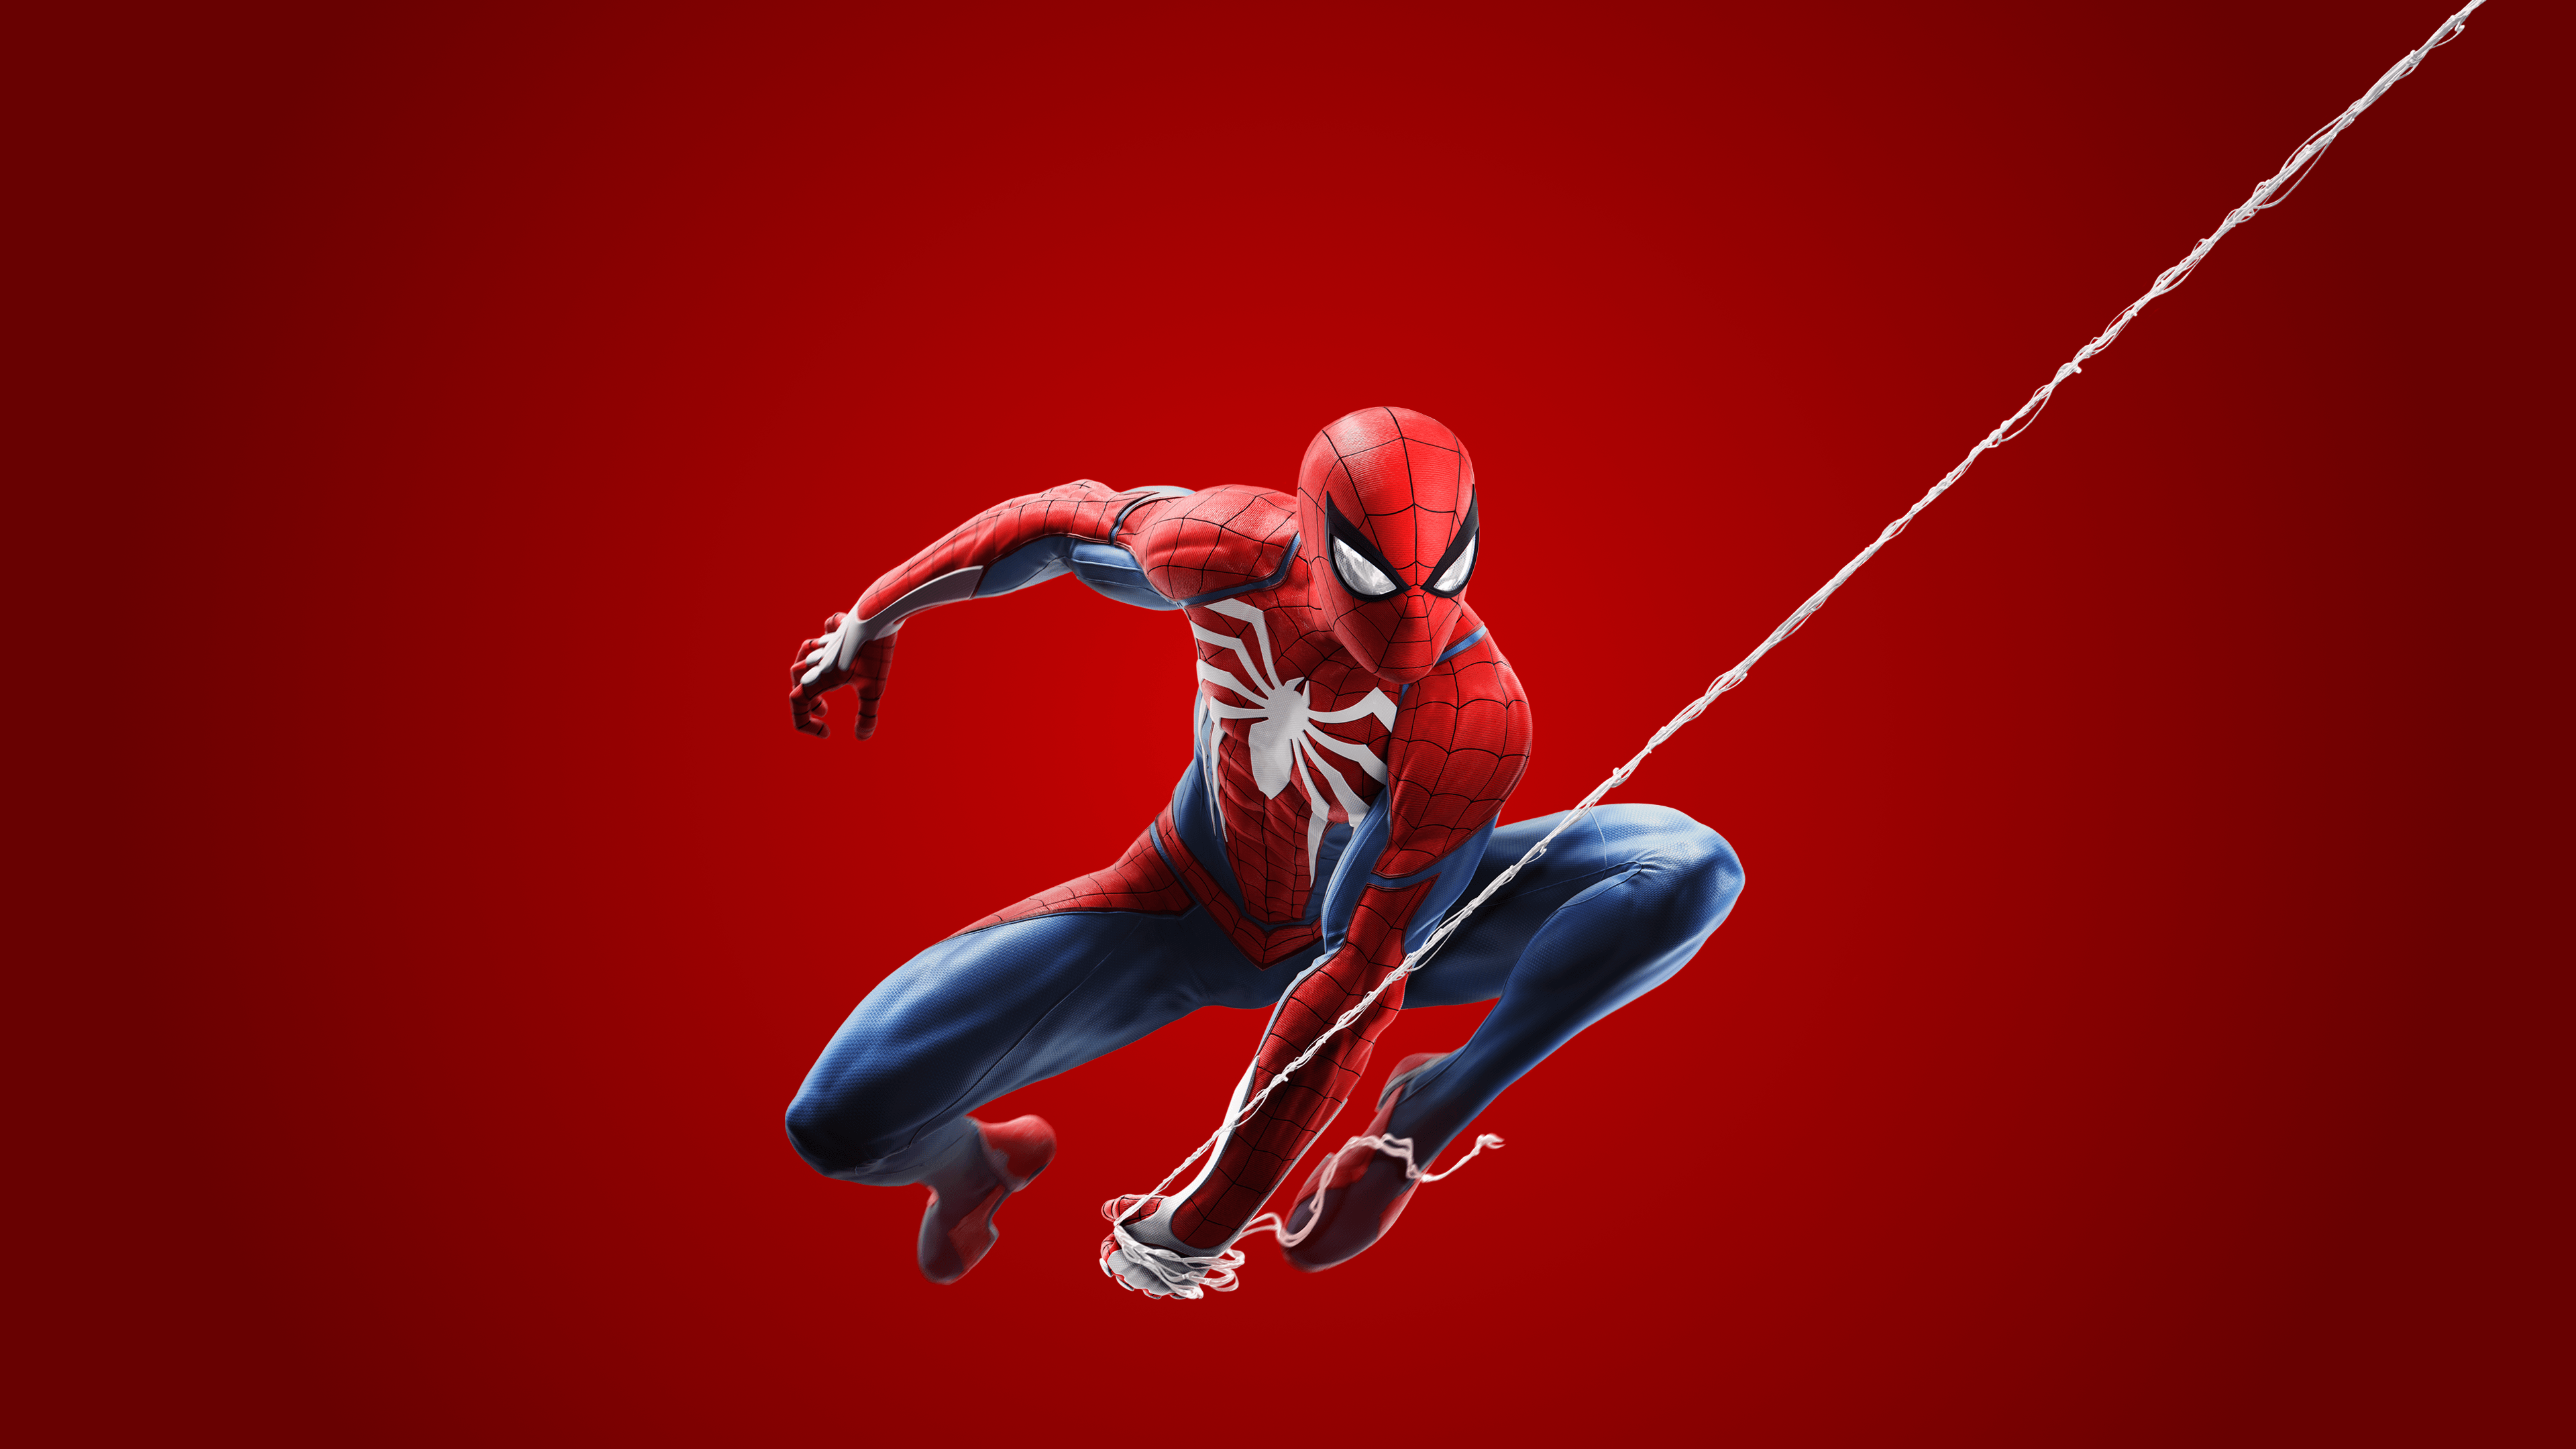 4K Wallpaper Of Spider Man For PS4 Alternate Version In Comments